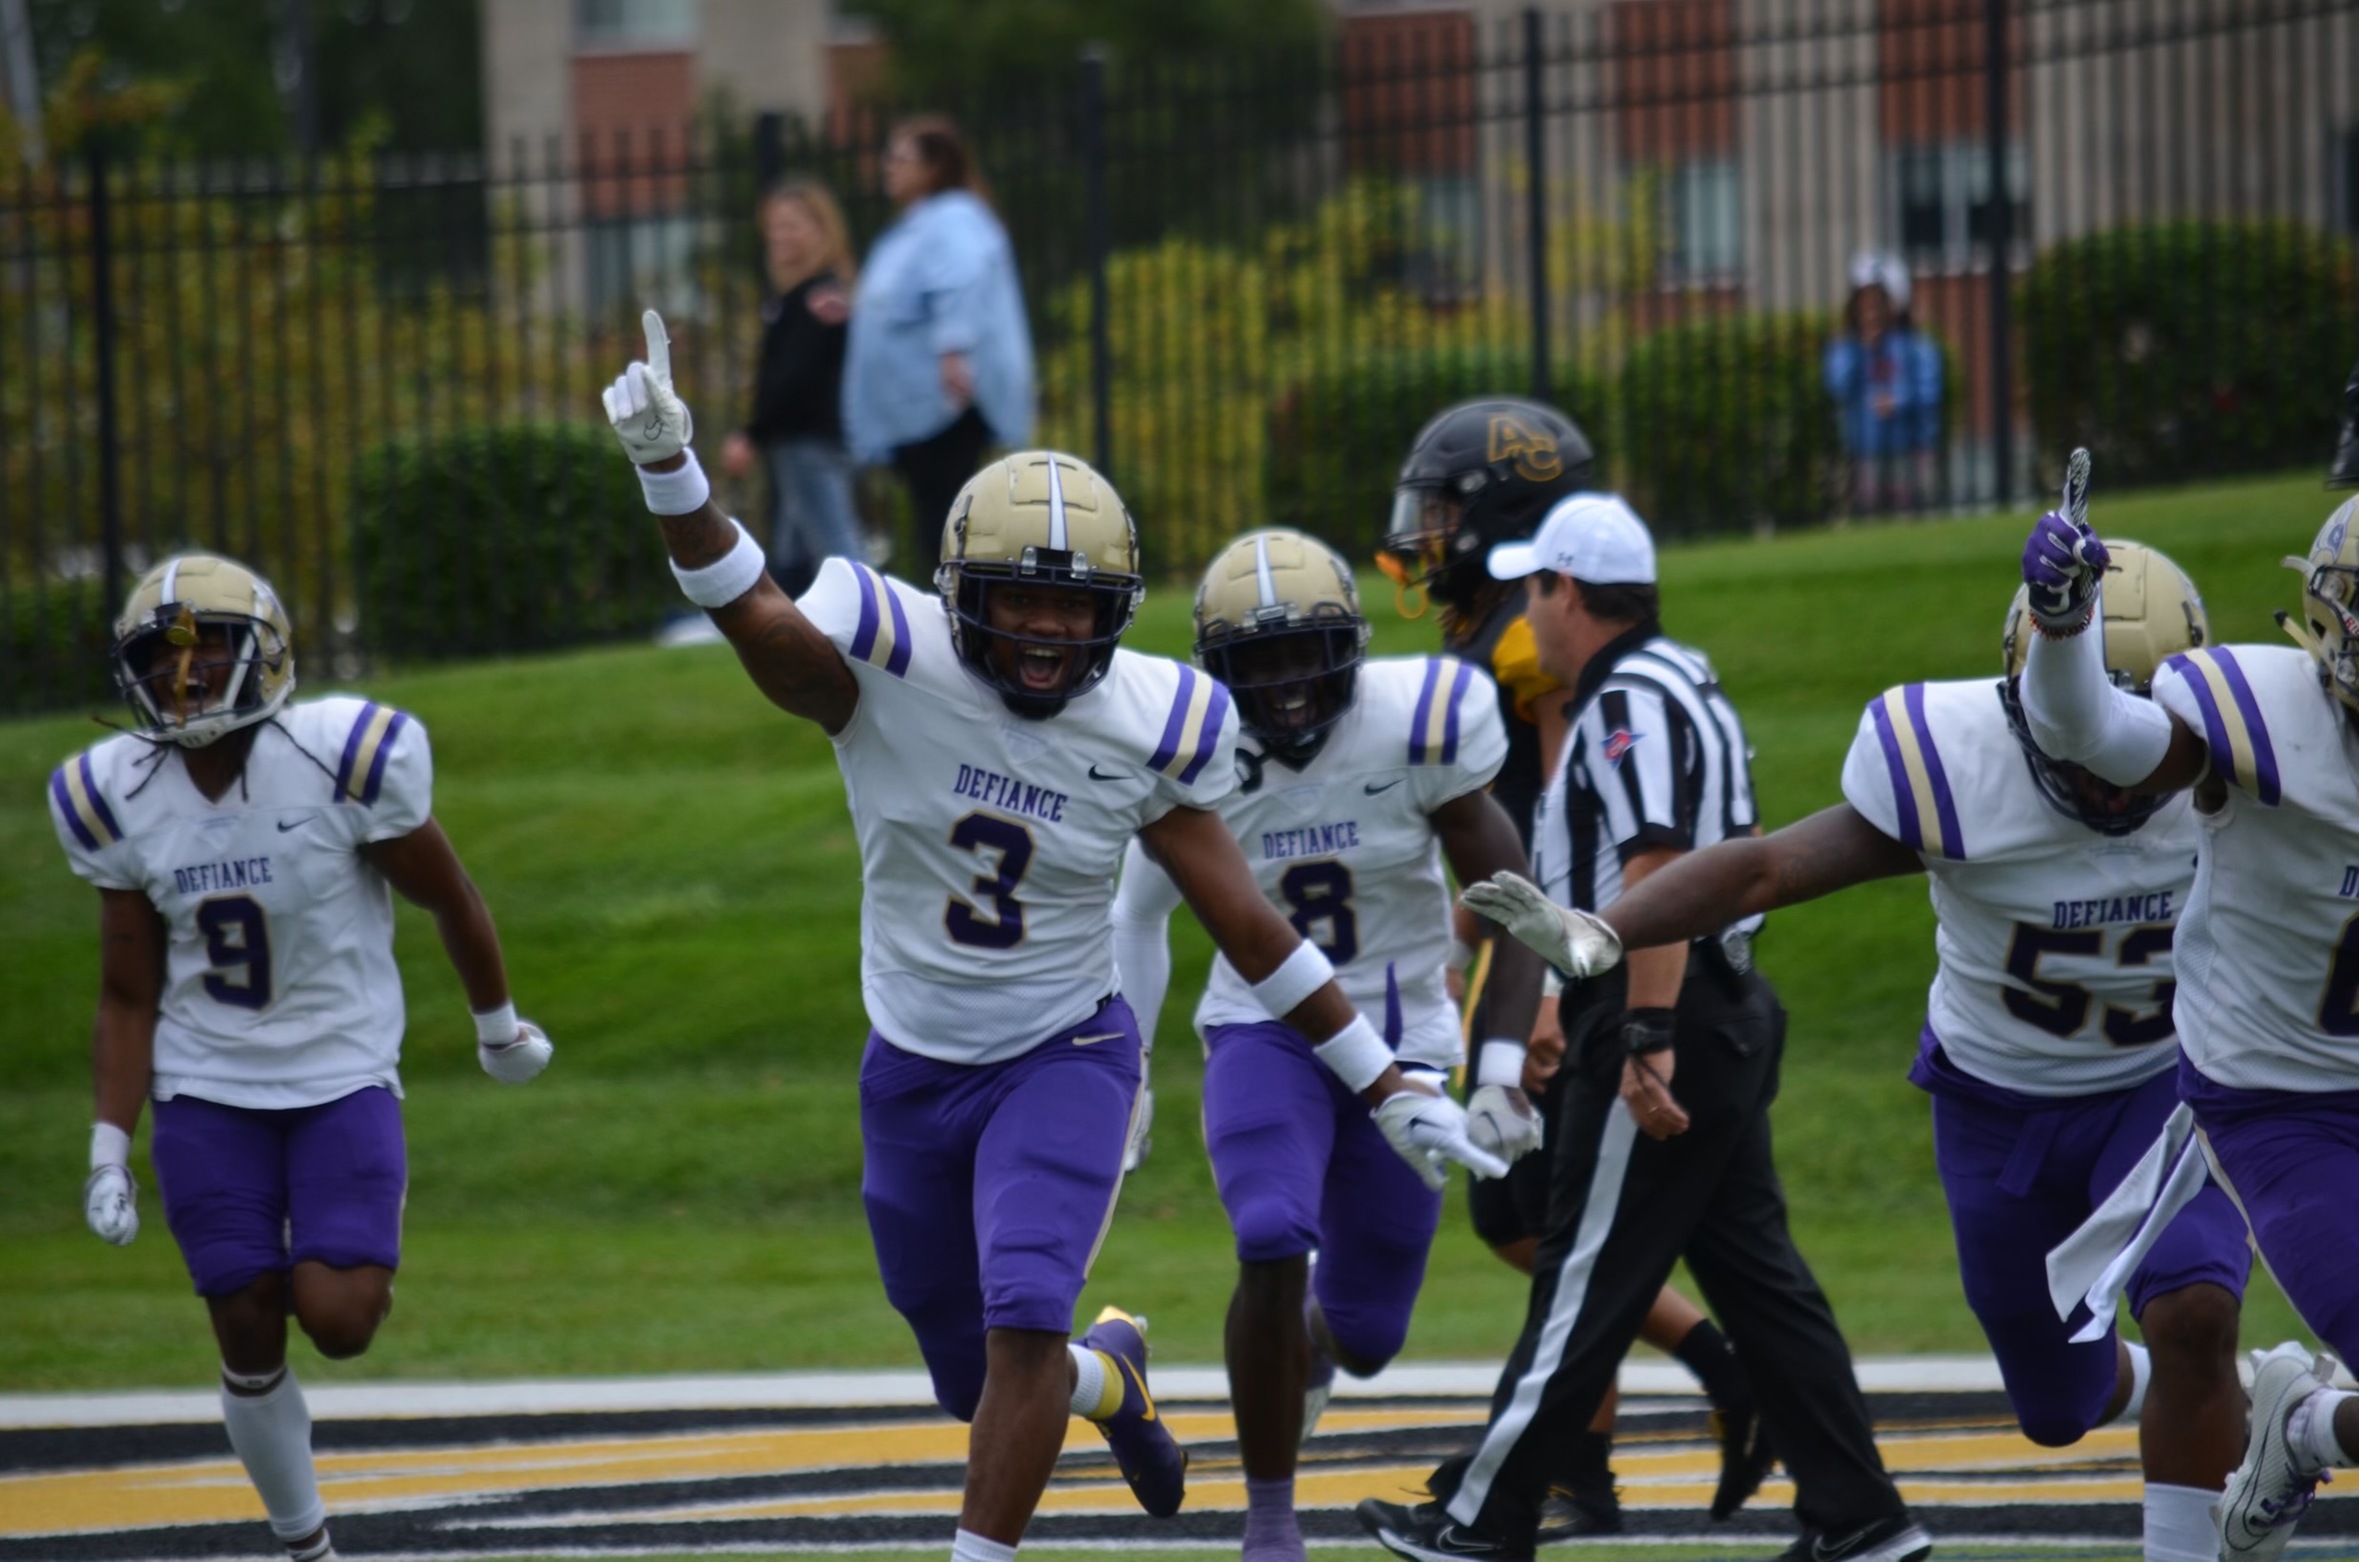 Yellow Jackets snap non-conference drought with 34-17 victory at Adrian